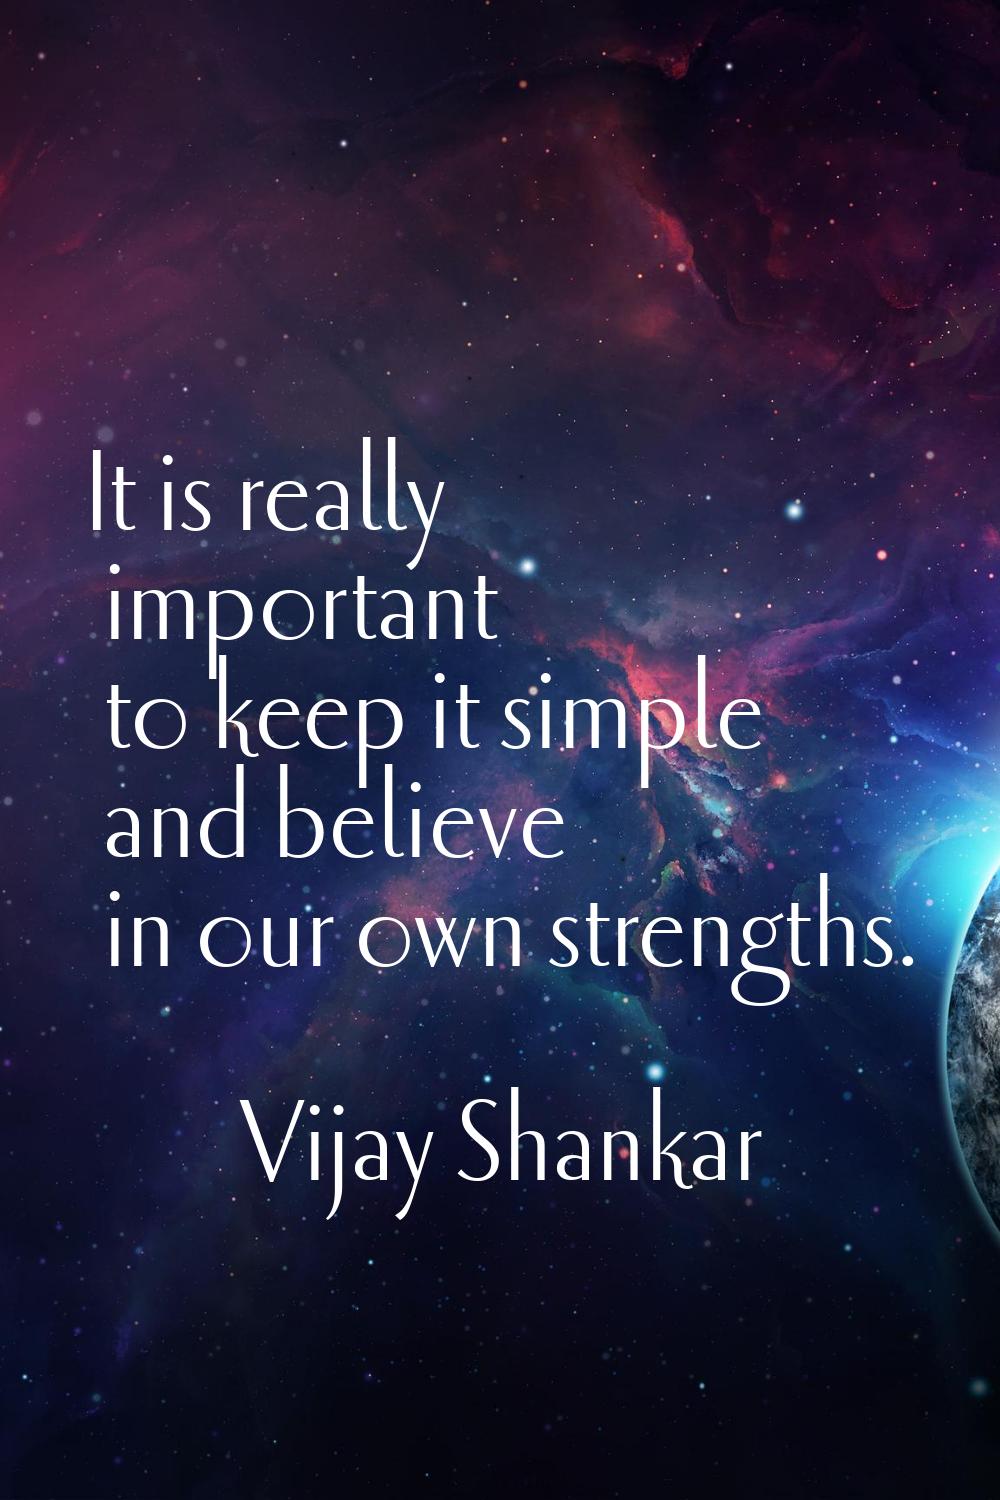 It is really important to keep it simple and believe in our own strengths.